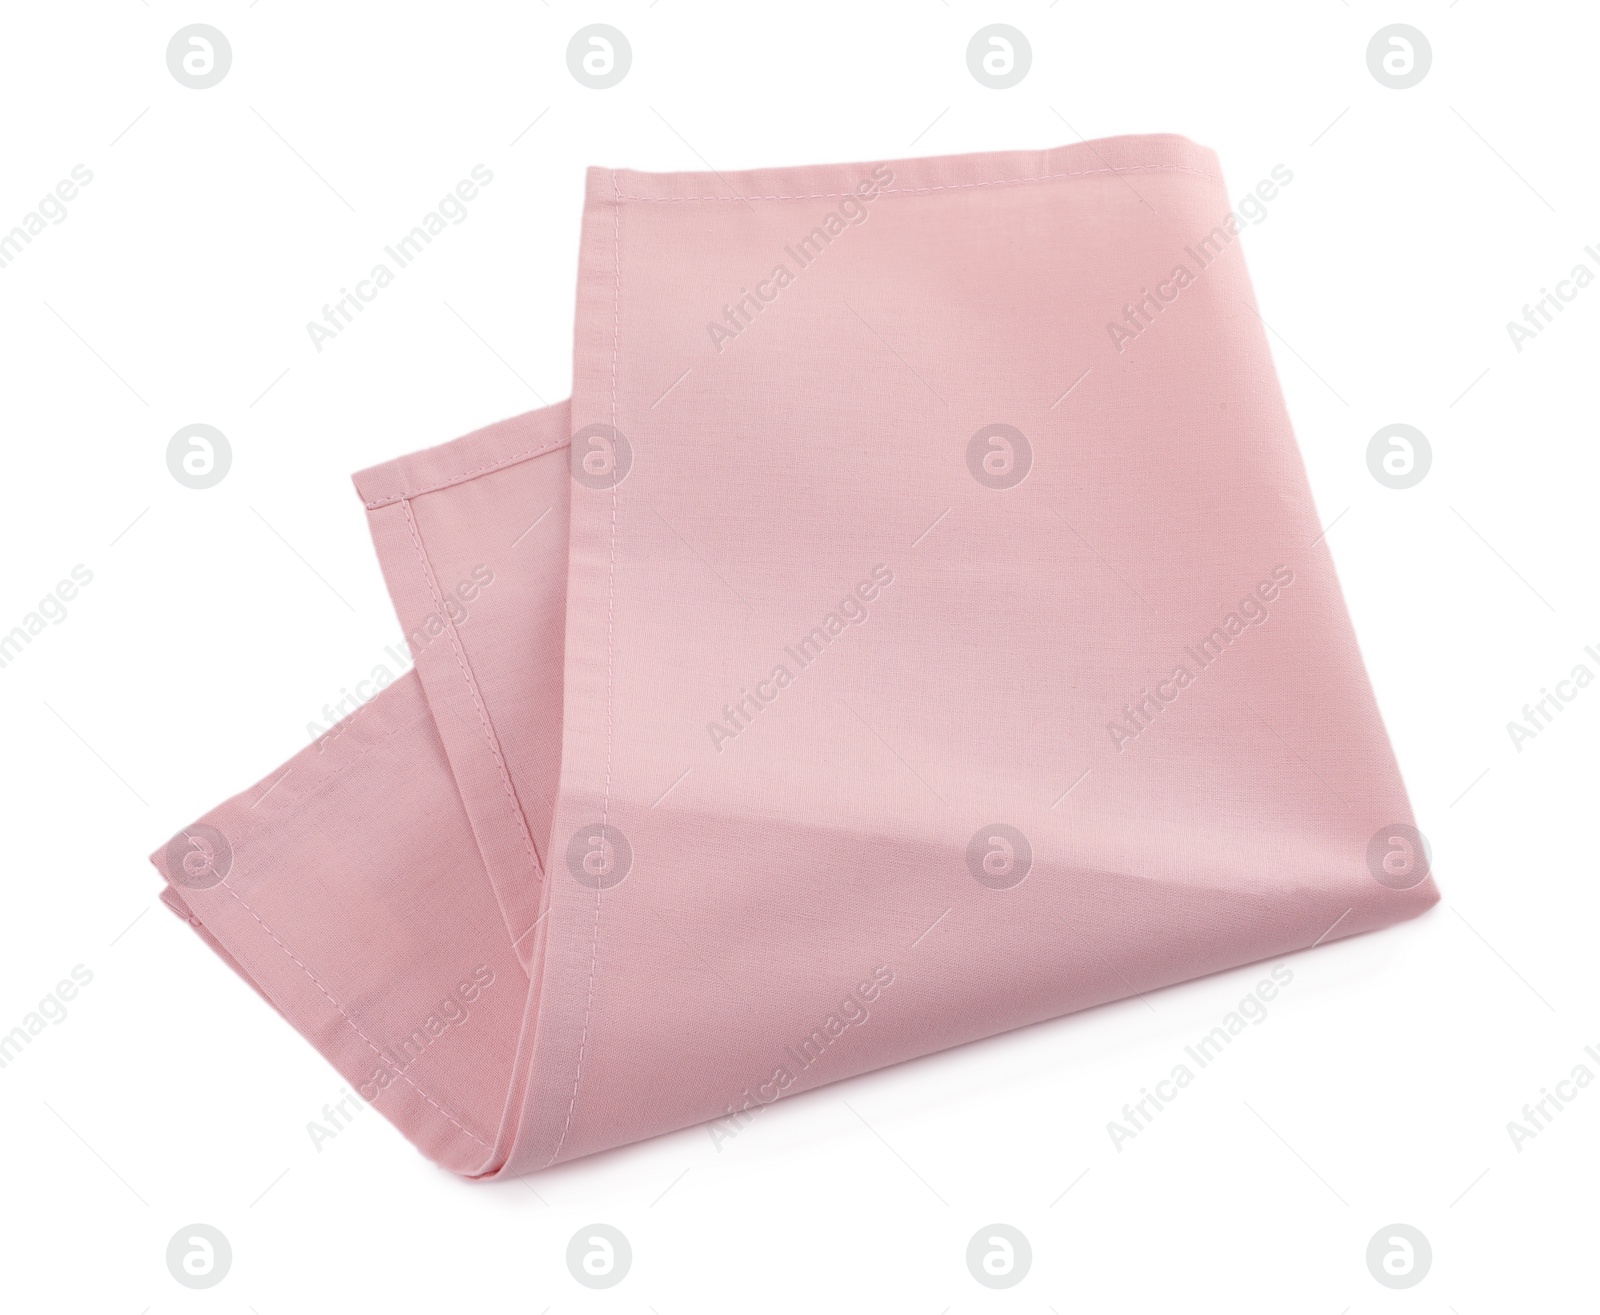 Photo of Fabric napkin for table setting on white background, top view